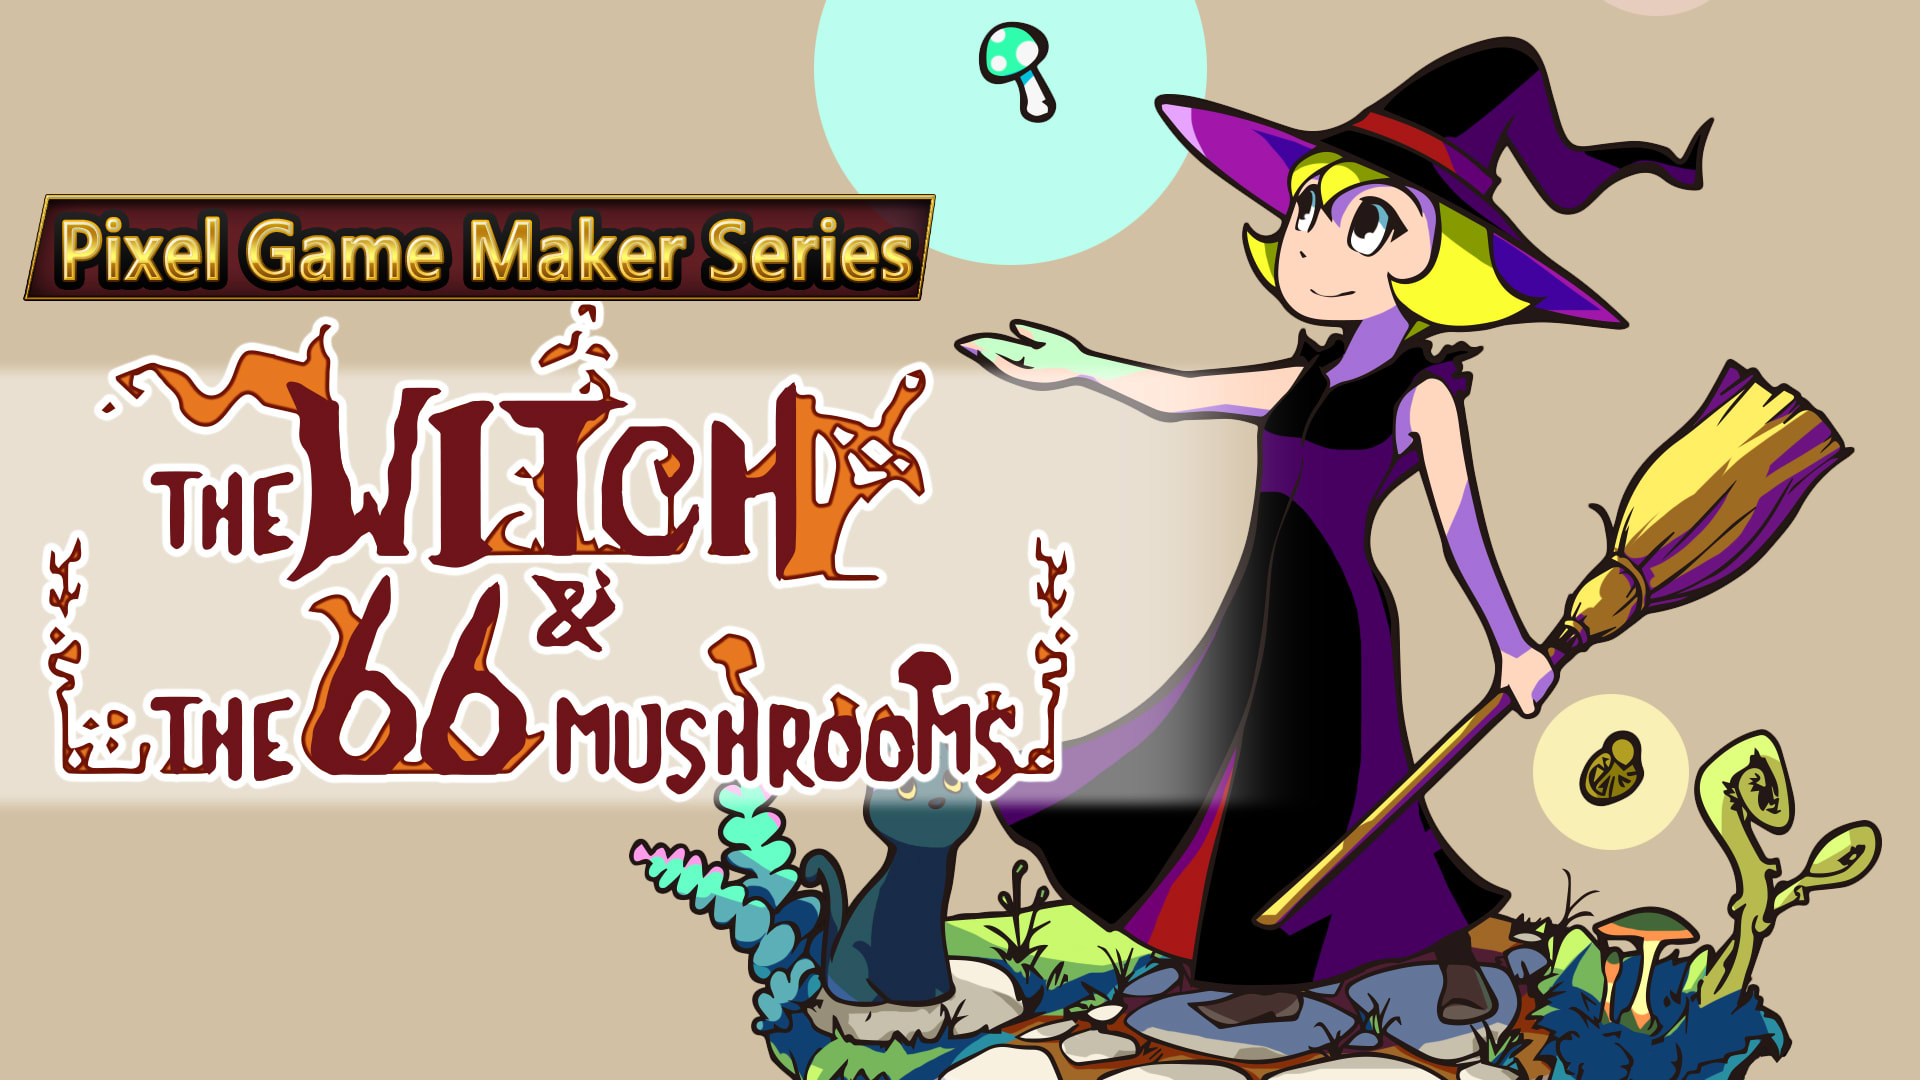 Pixel Game Maker Series The Witch and The 66 Mushrooms